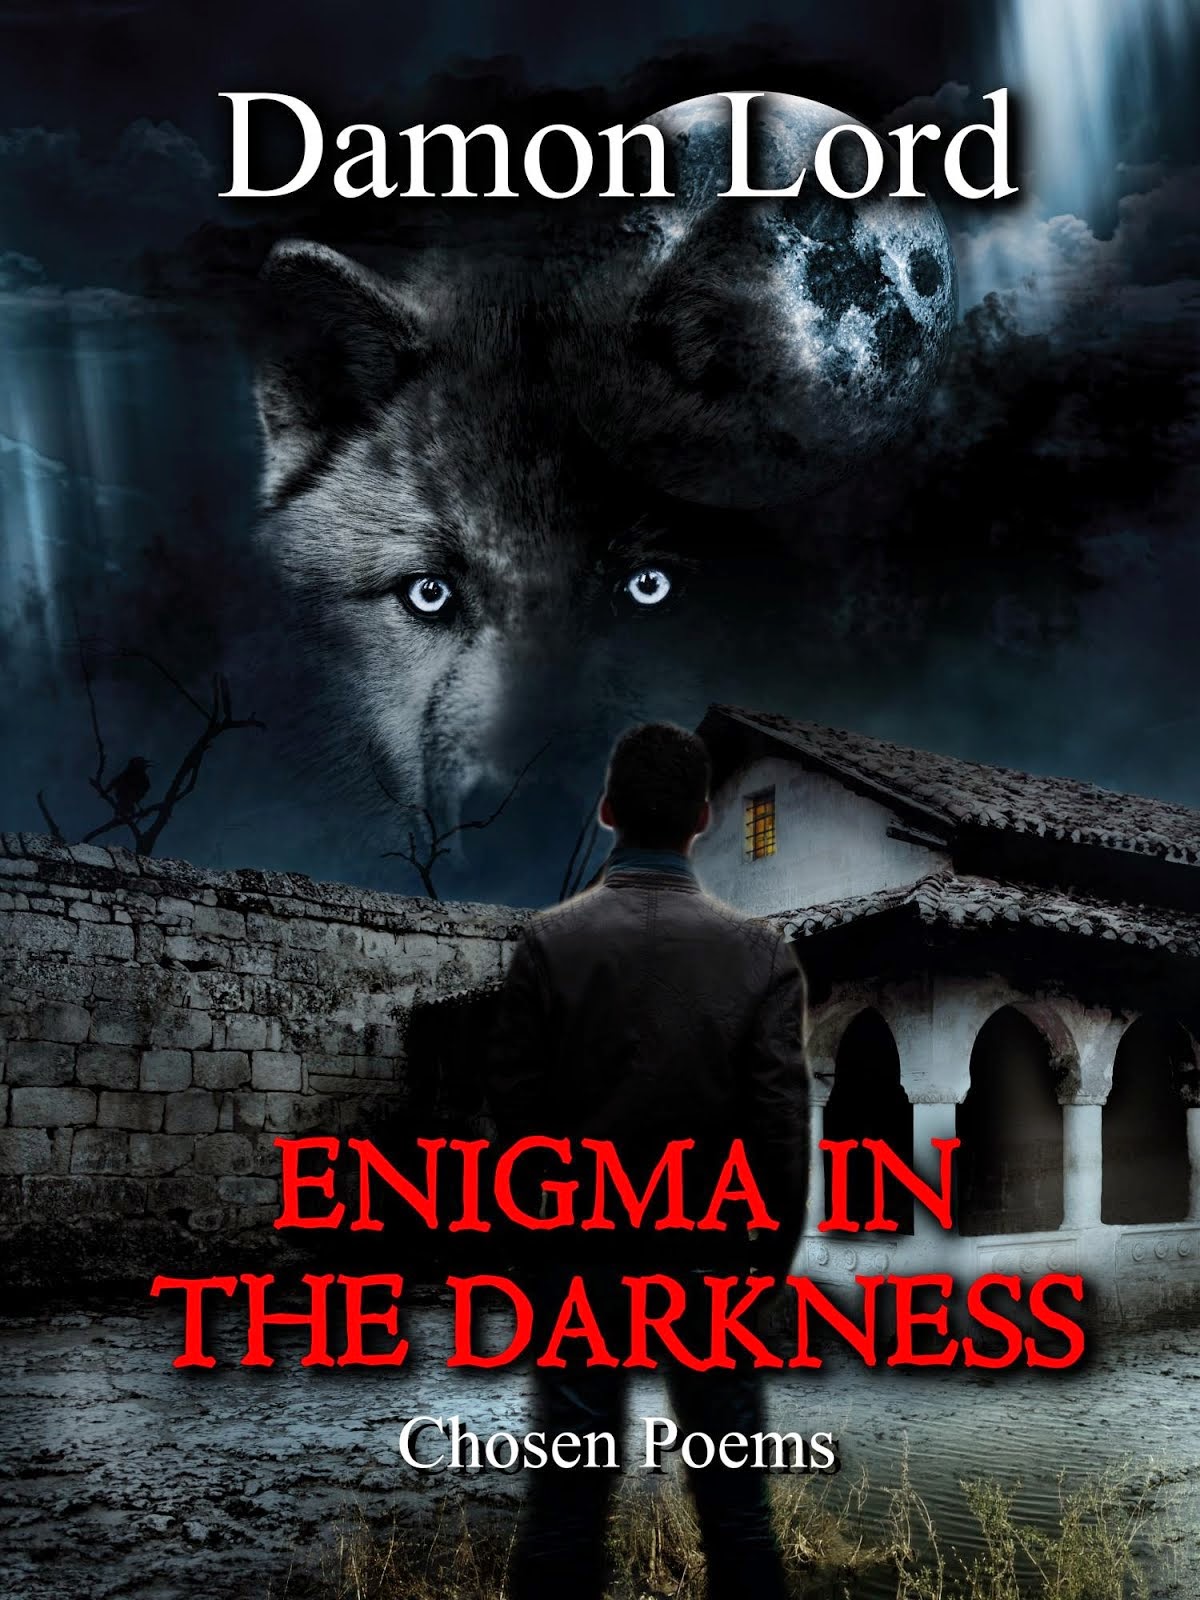 Enigma in the Darkness